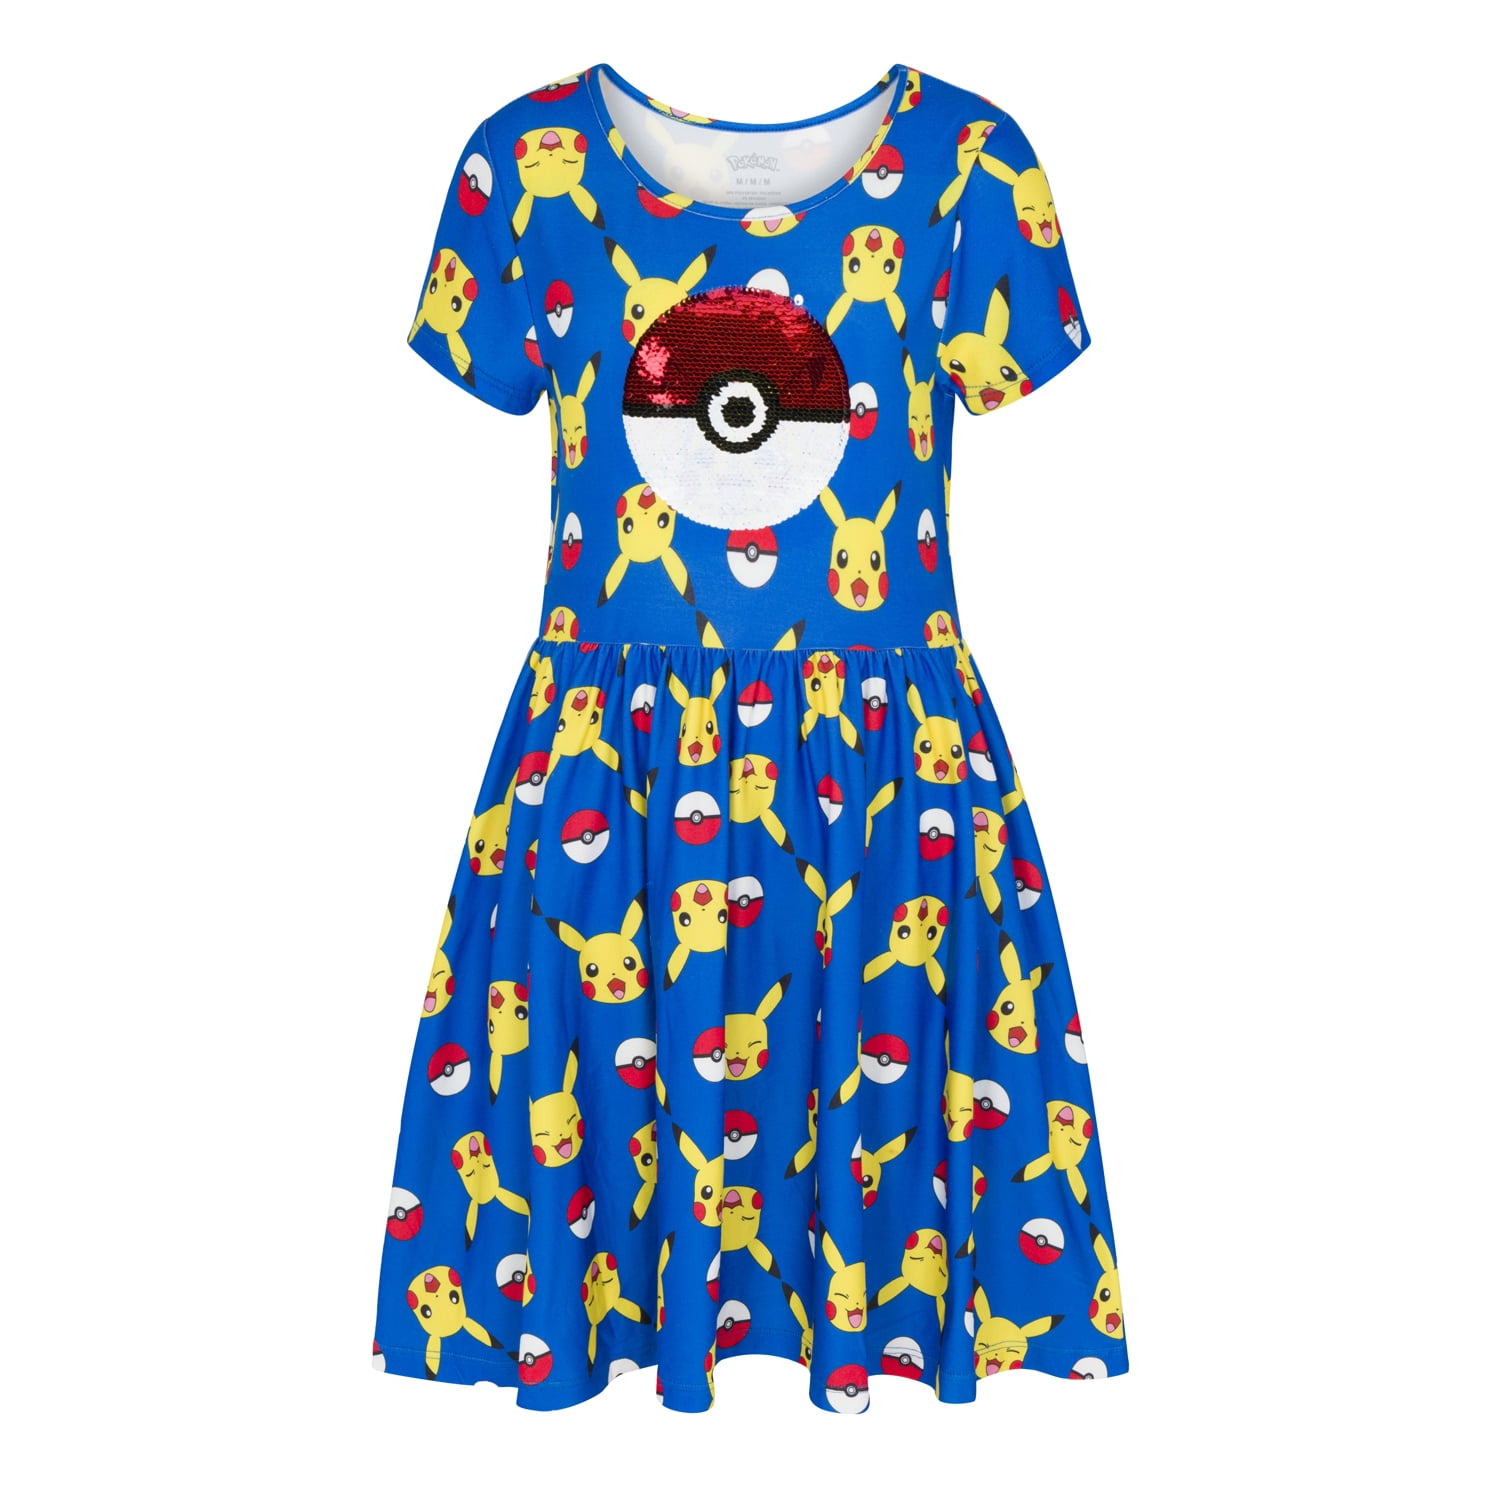 Girl's Pokemon Dress with Pikachu Sequins for Little and Big Girls, XL (14/16) - Walmart.com